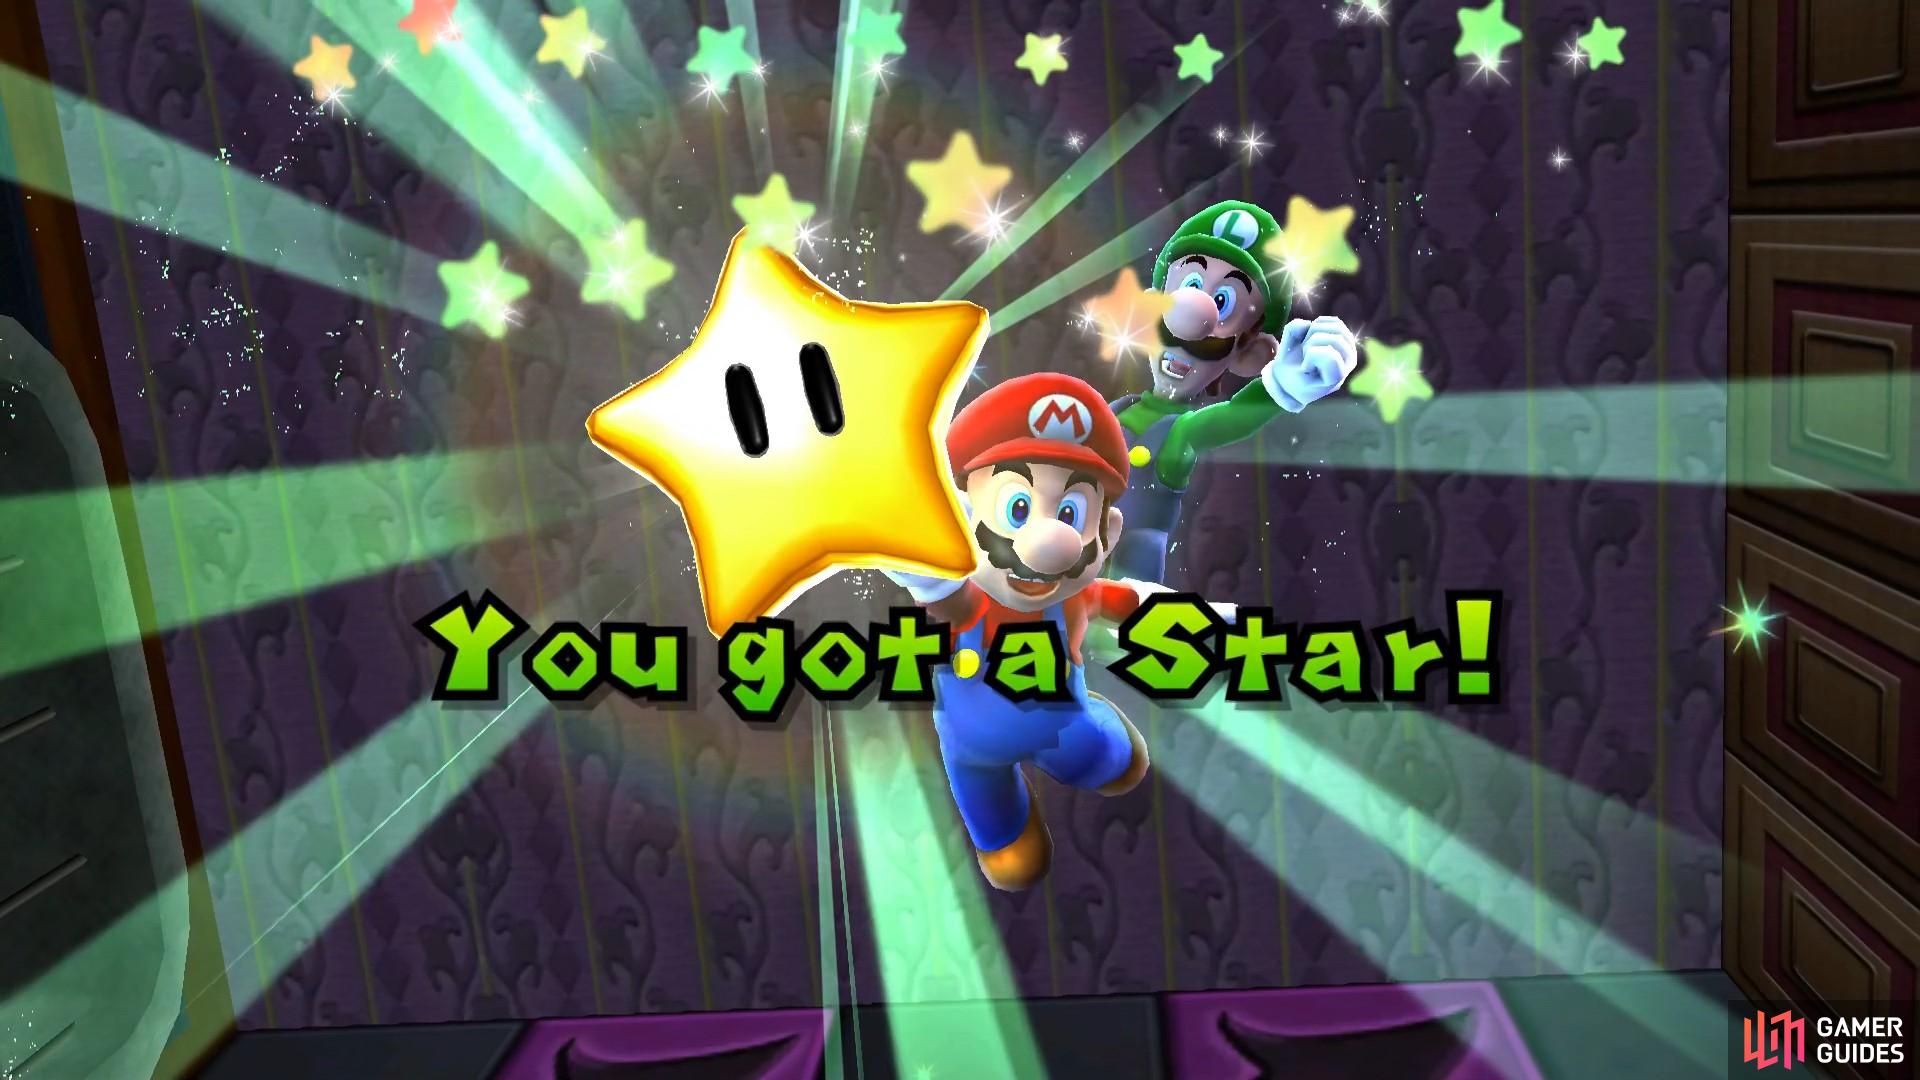 Get to Luigi and he will give you a Power Star!